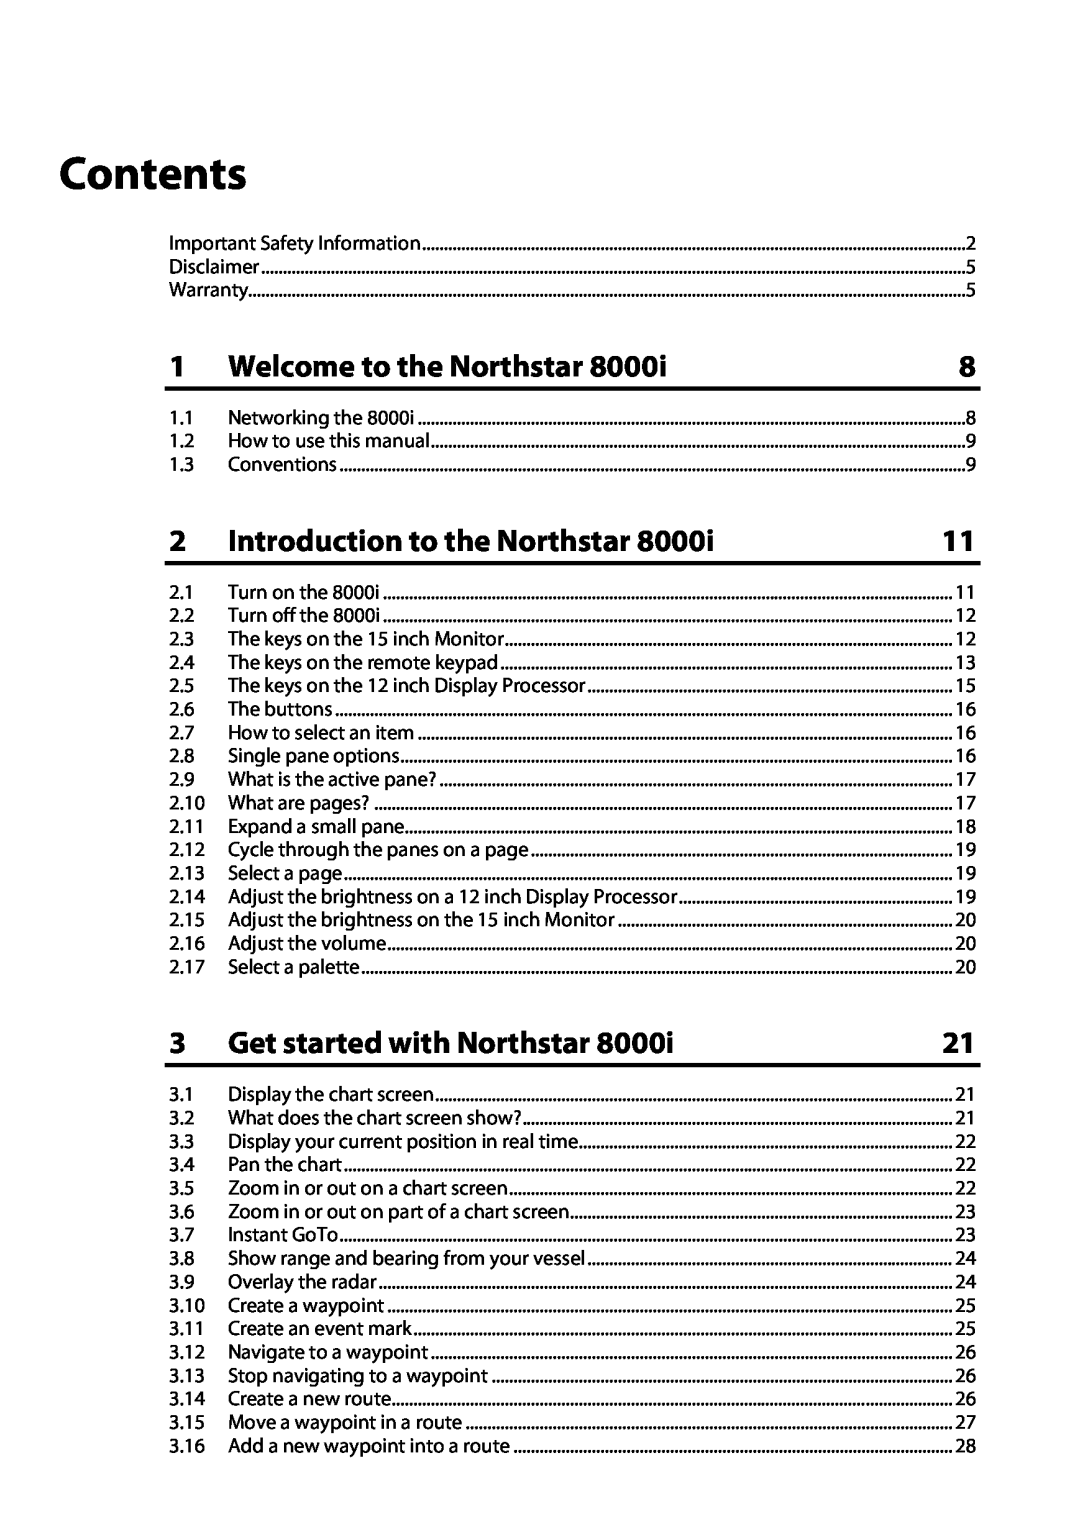 NorthStar Navigation 8000I Welcome to the Northstar, Introduction to the Northstar, Get started with Northstar, Contents 